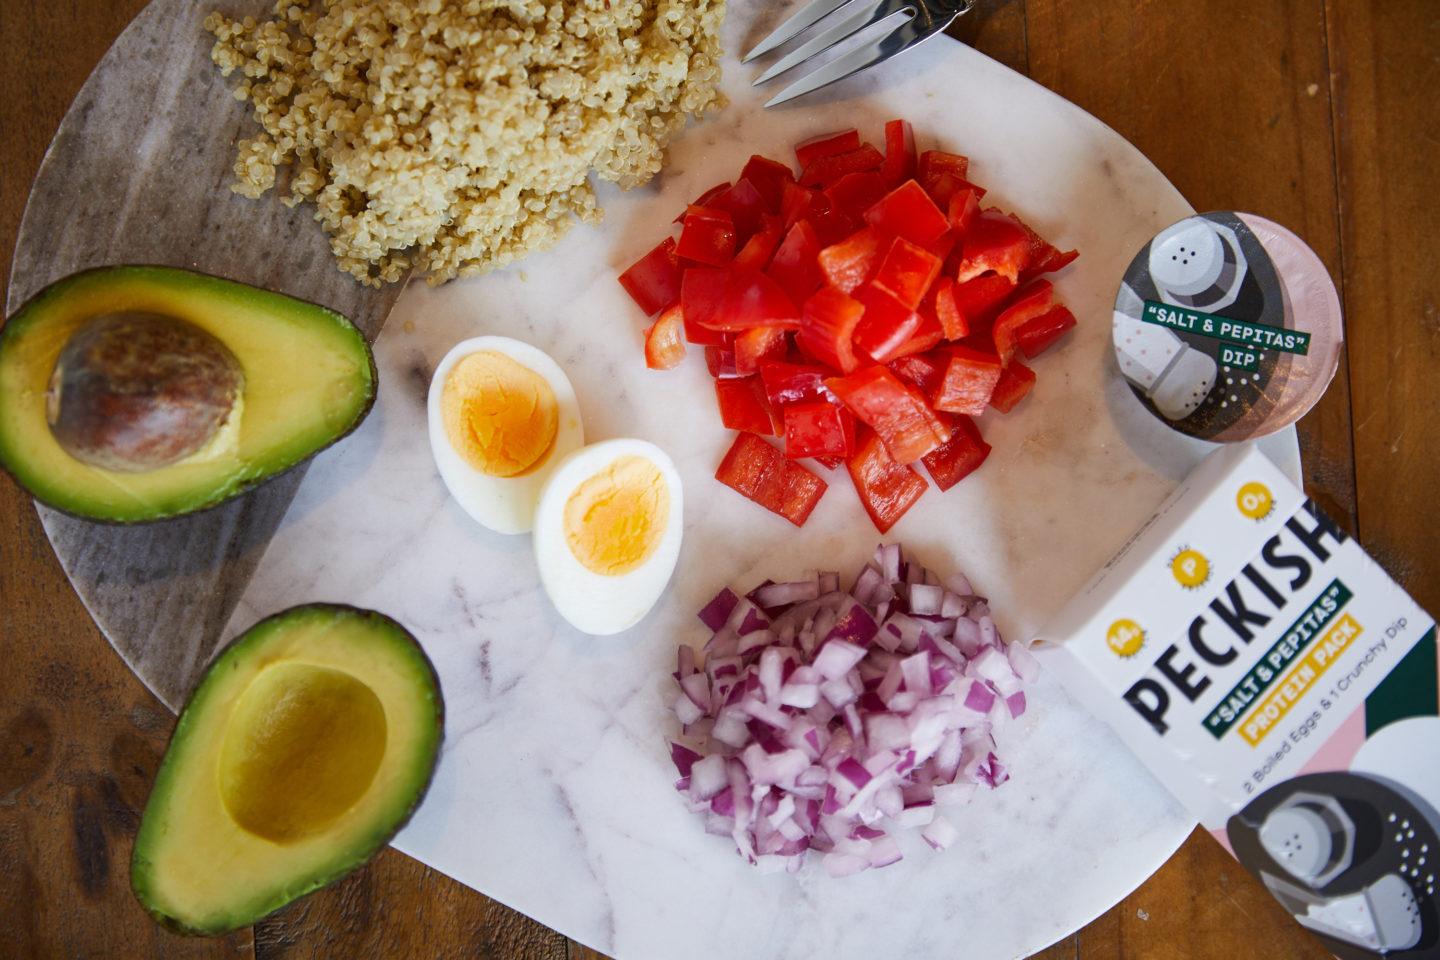 Cutting board with avocado, boiled eggs, quinoa, red onions, and tomato